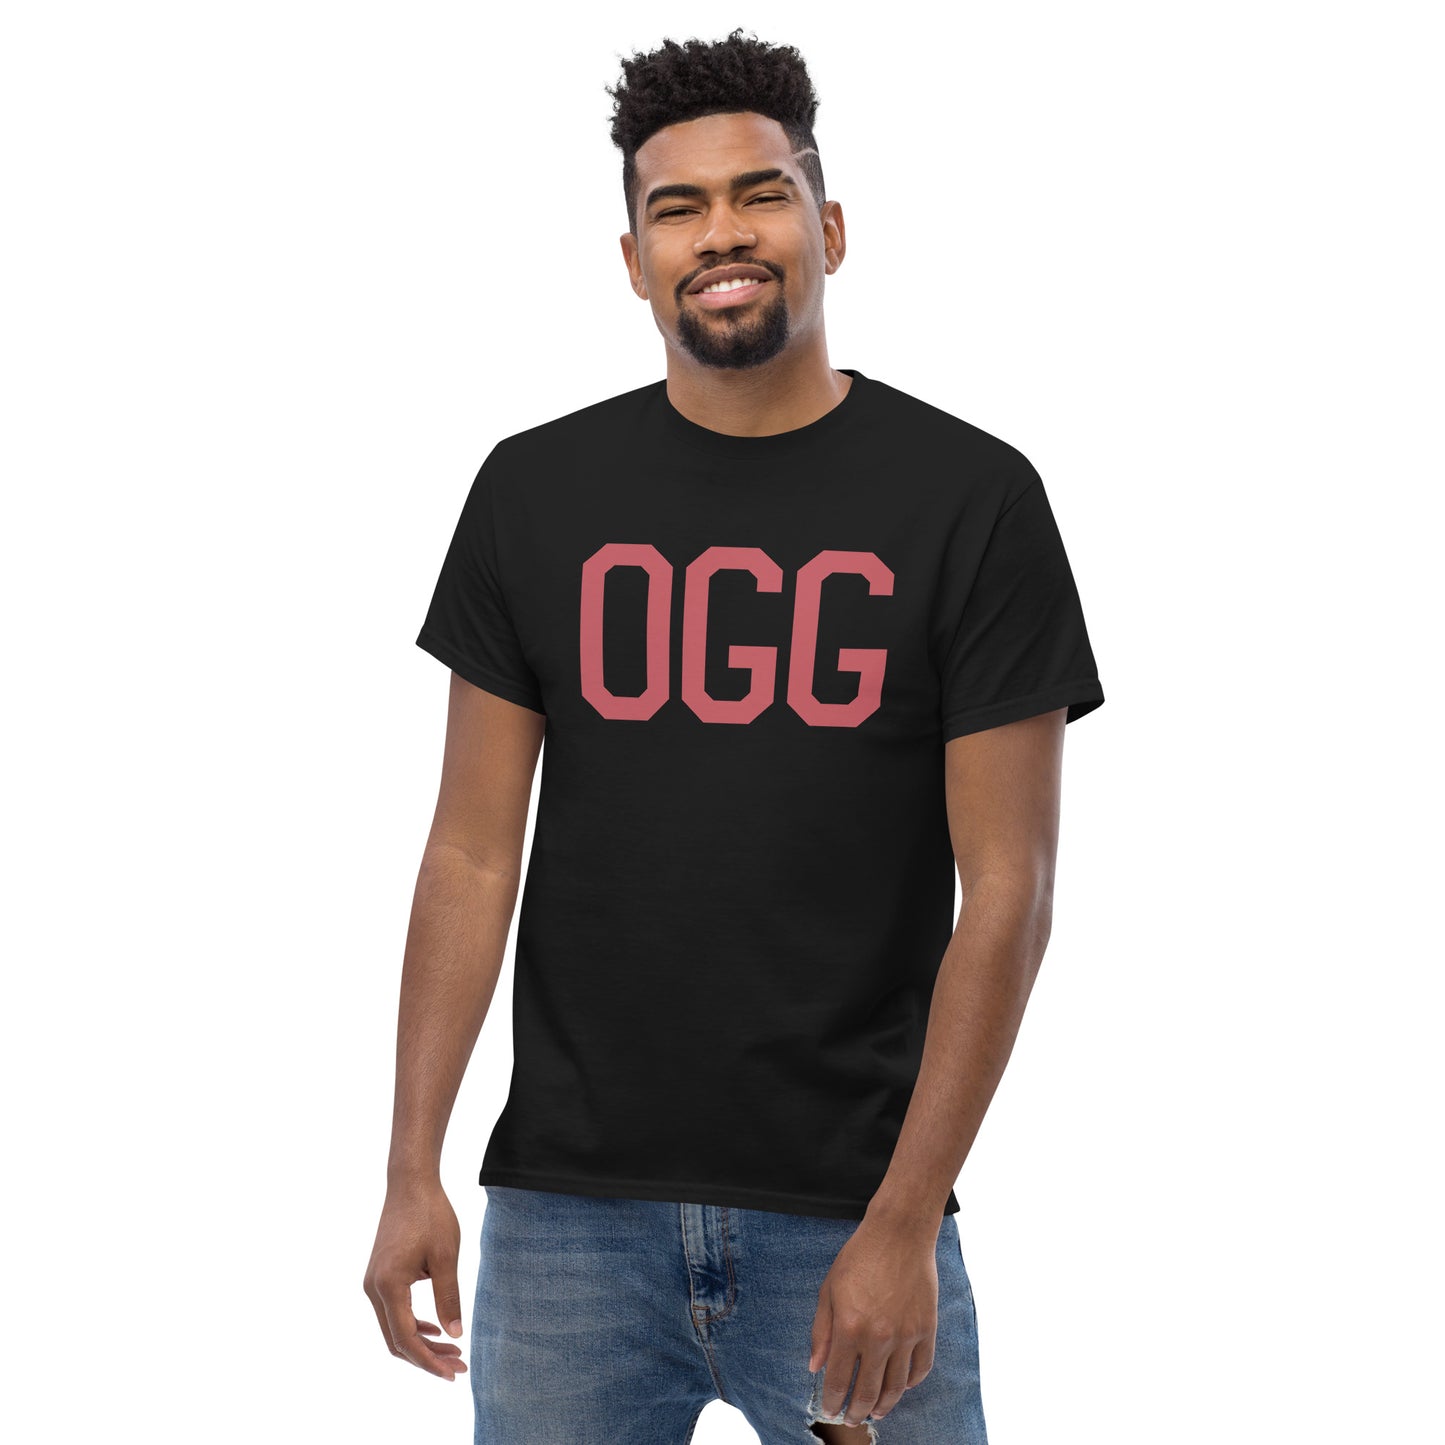 Aviation Enthusiast Men's Tee - Deep Pink Graphic • OGG Maui • YHM Designs - Image 06